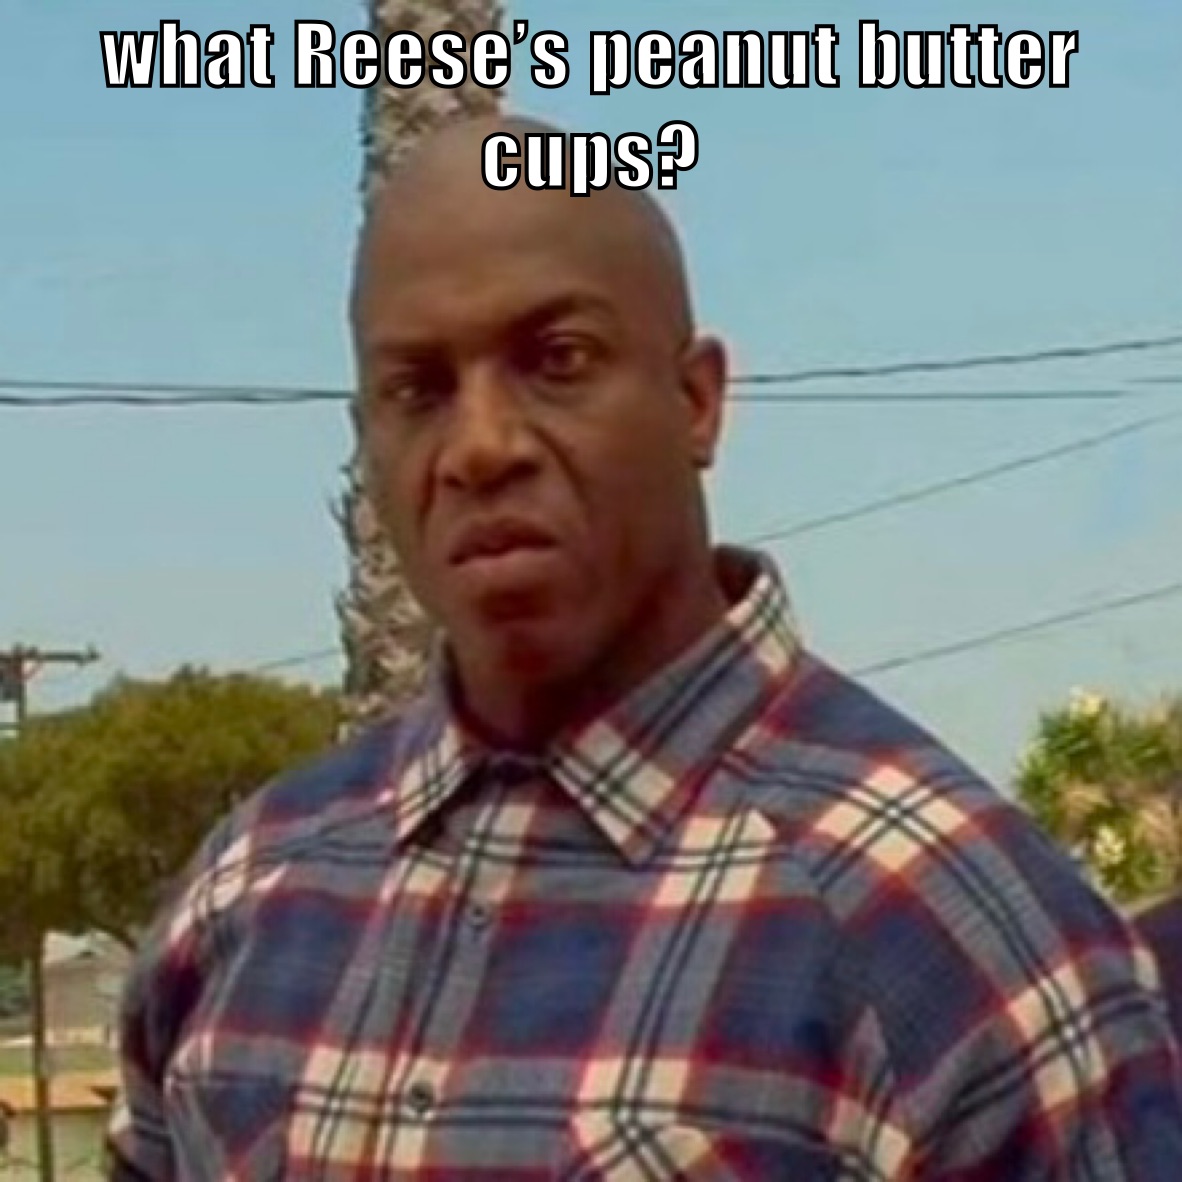 what Reese’s peanut butter cups?